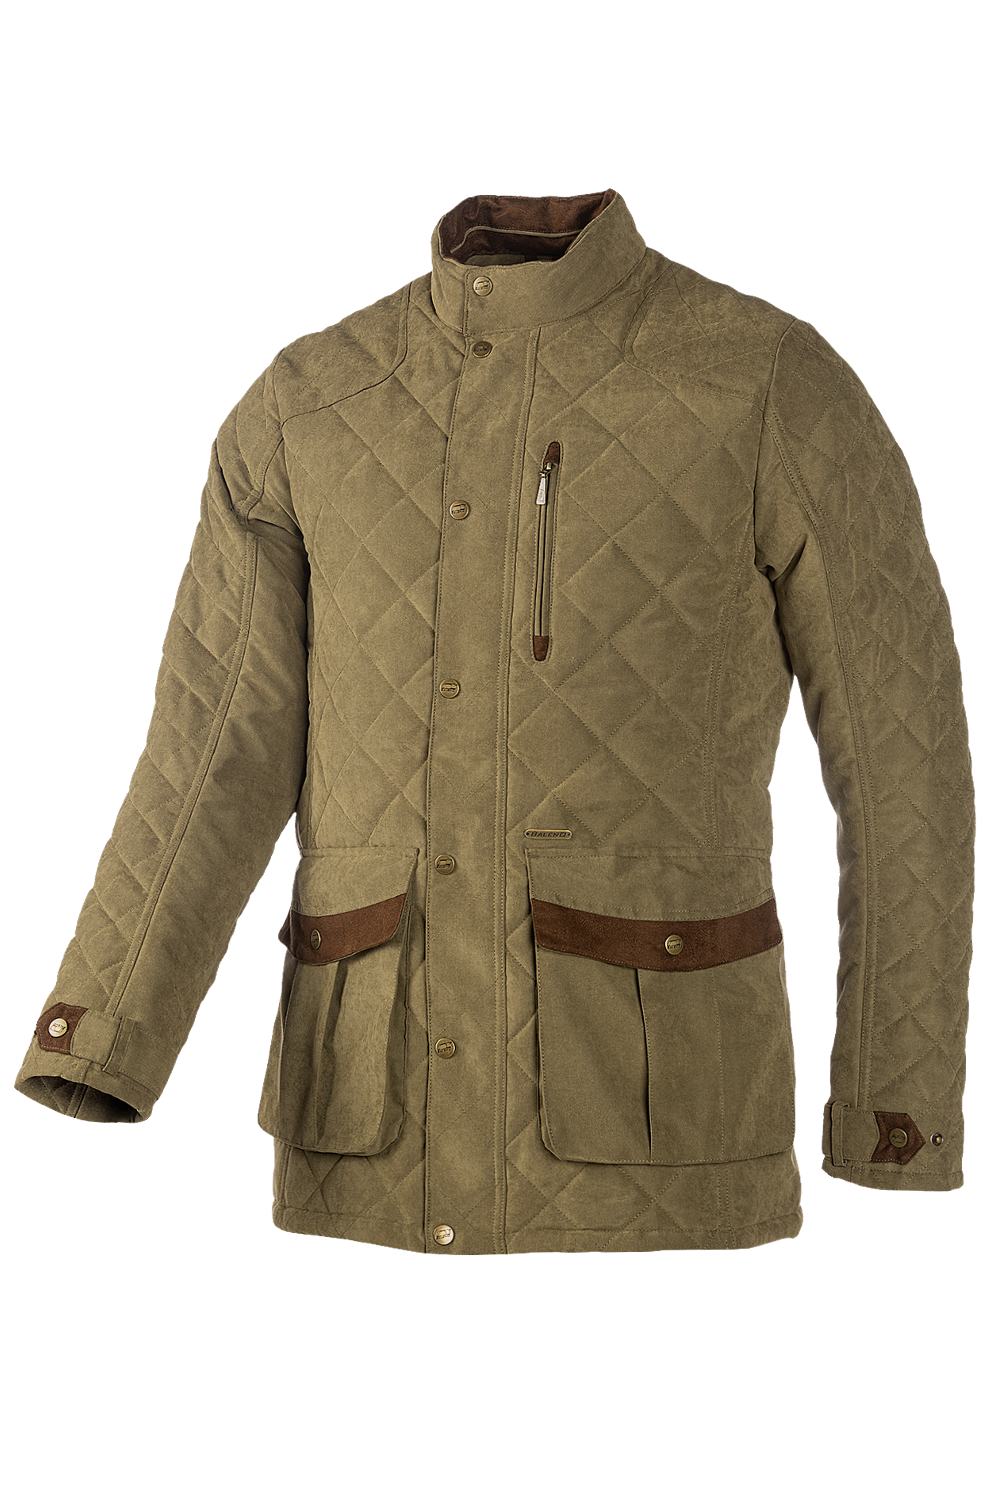 Baleno Mens Goodwood Quilted Jacket in Light Khaki 